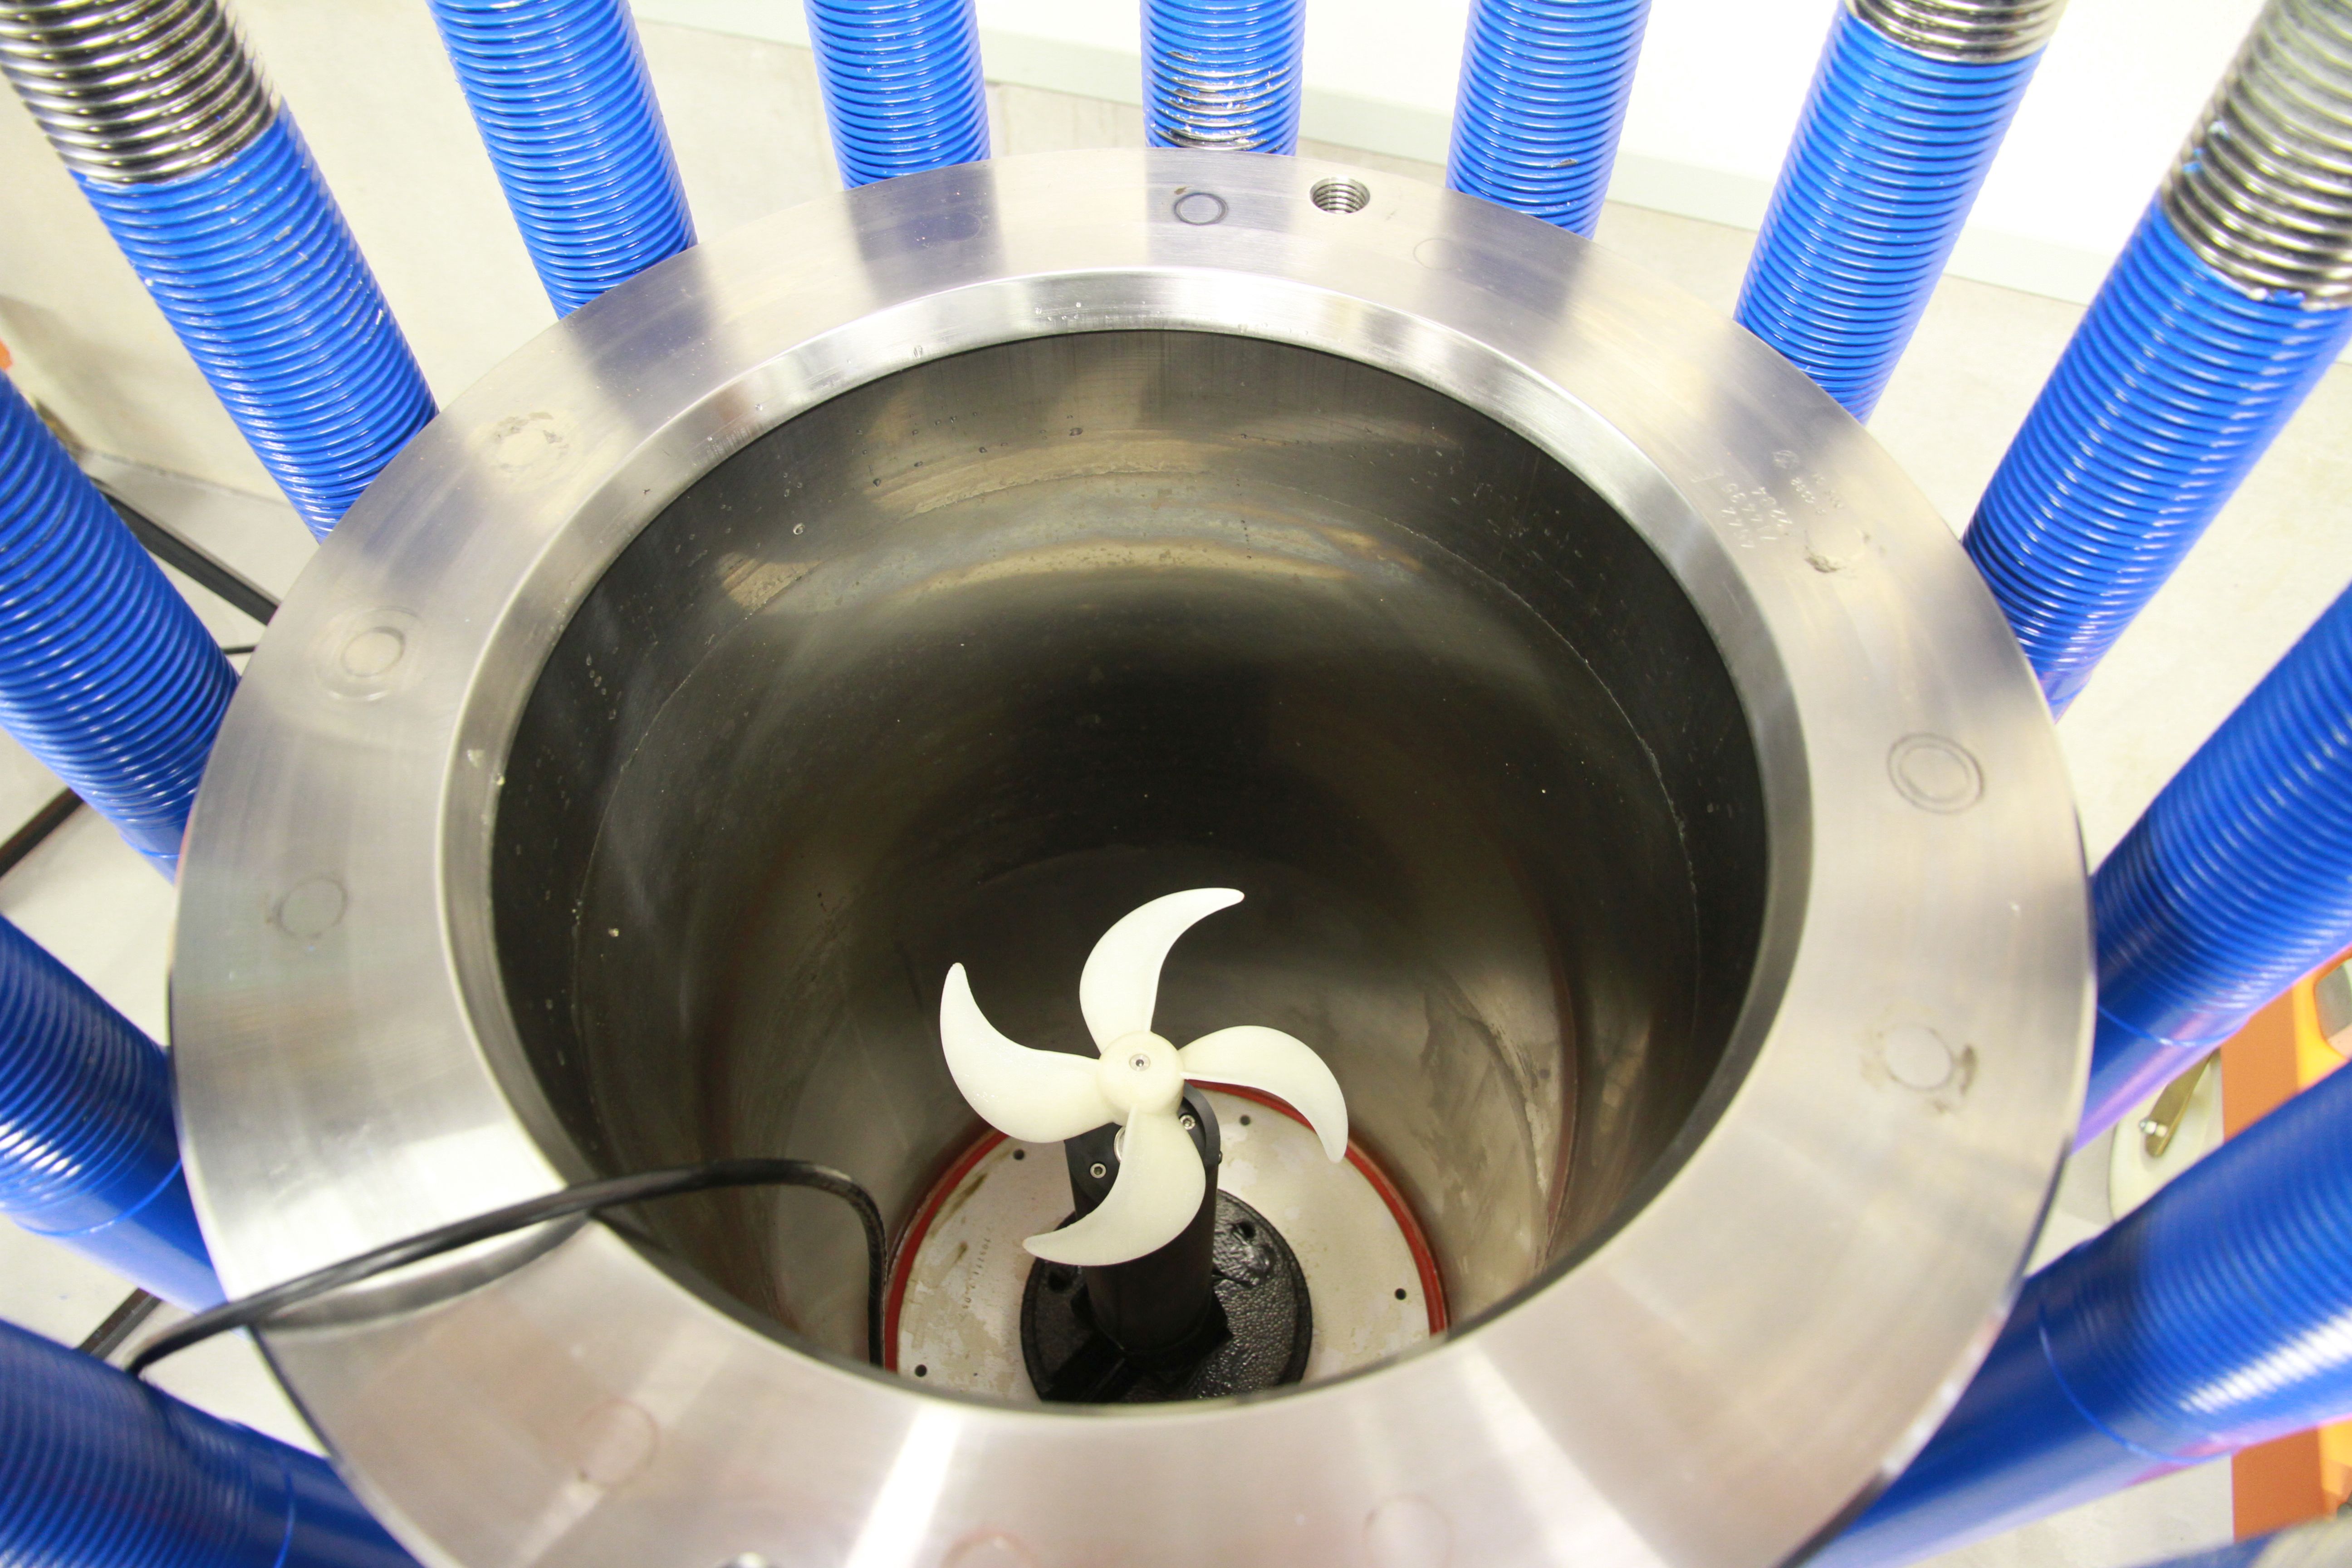 Pressure test chamber: Test object